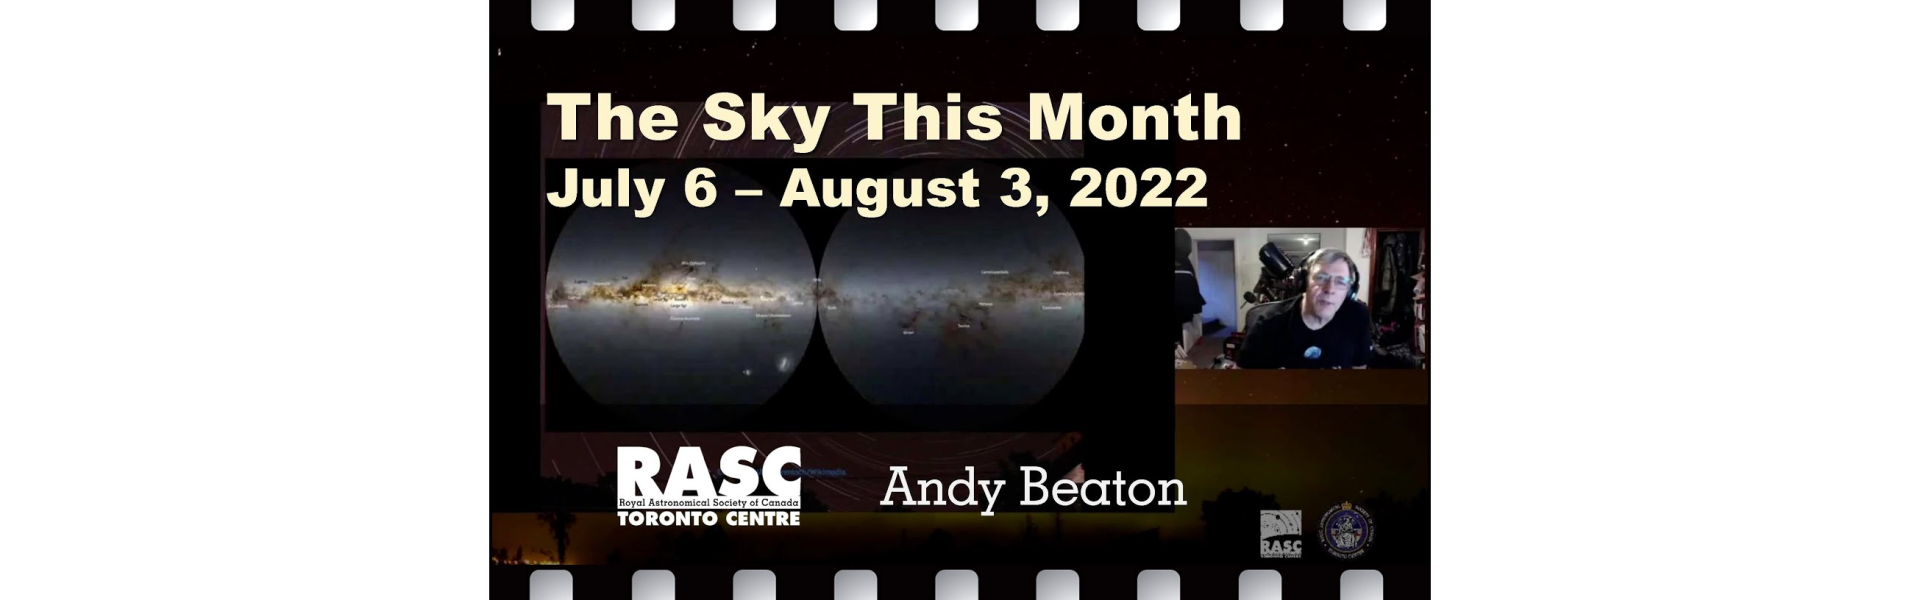 The Sky This Month July 6 - August 3, 2022 with Andy Beaton